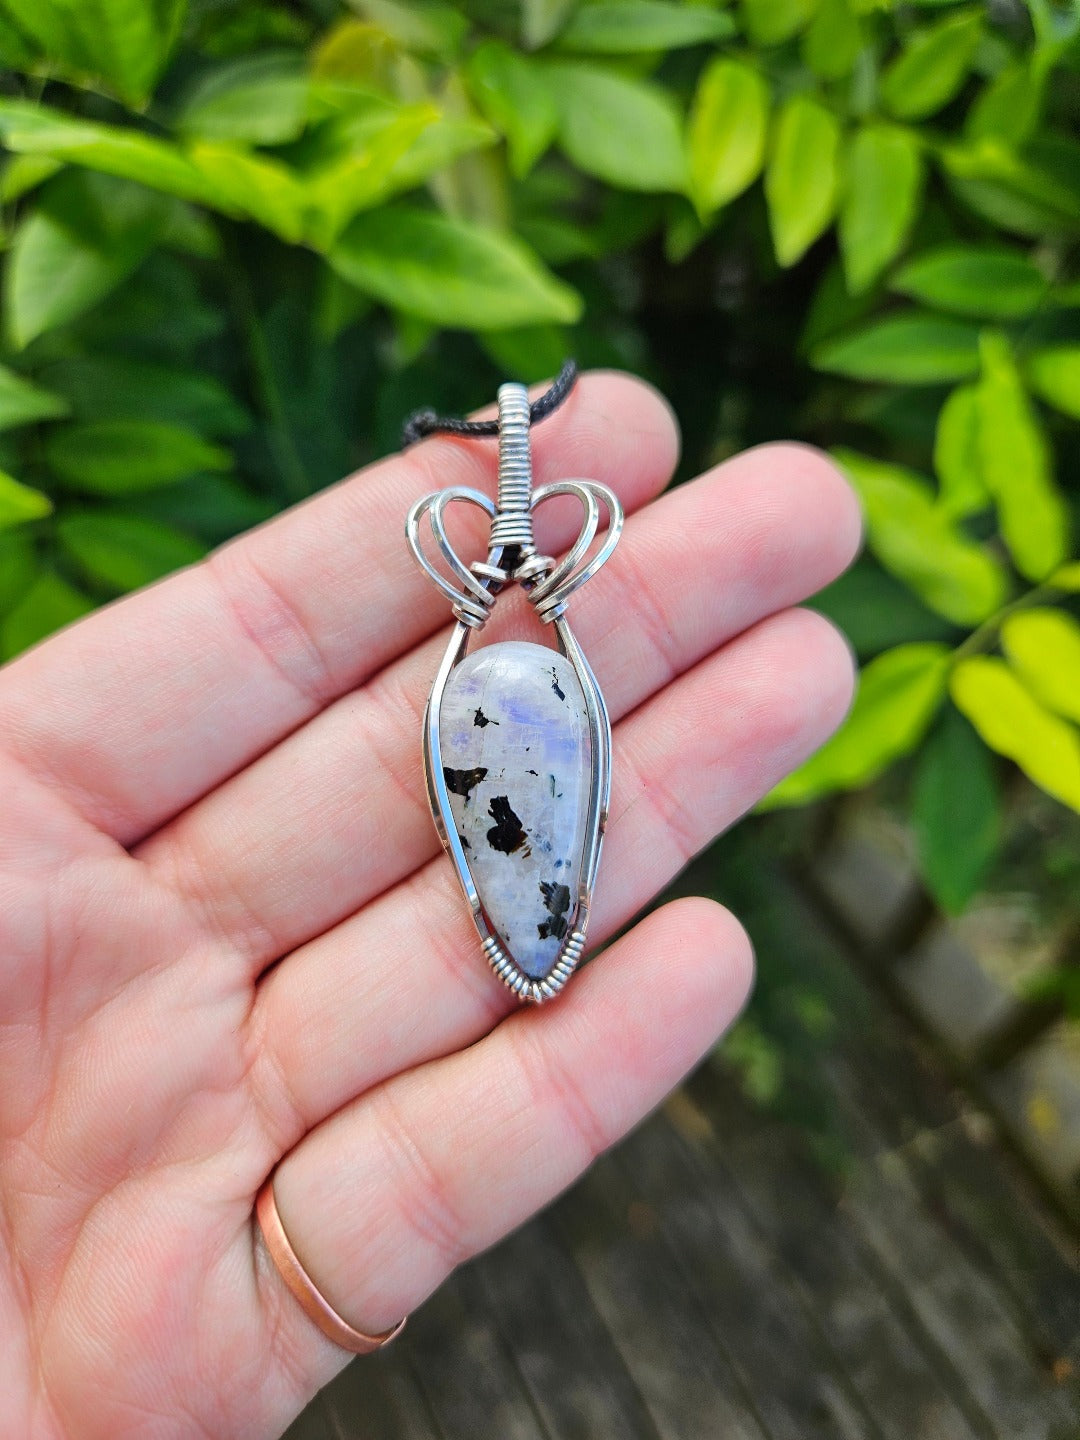 Moonstone and Silver Necklace